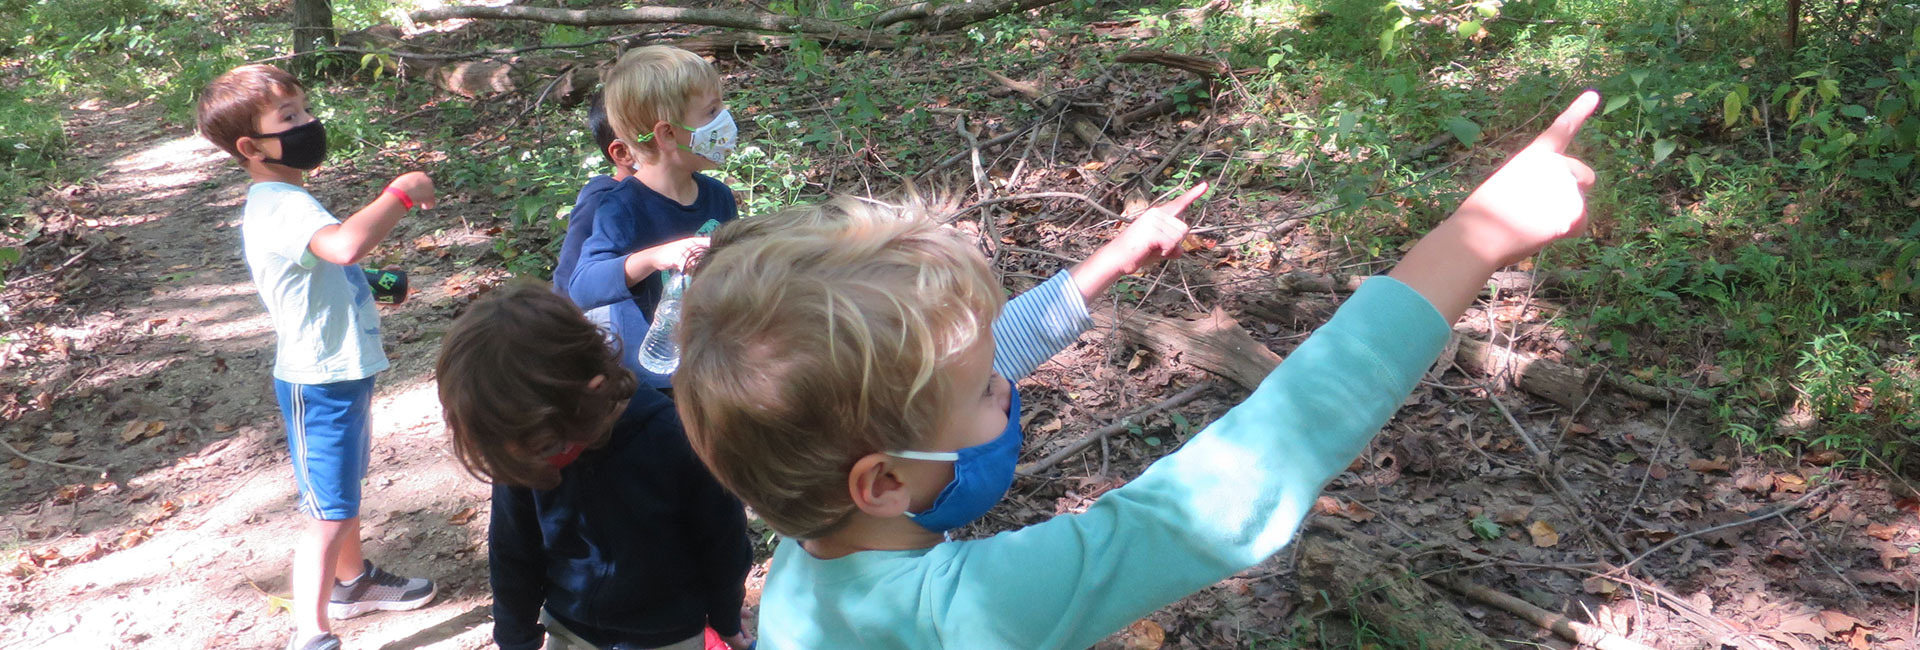 children outside in woods pointing